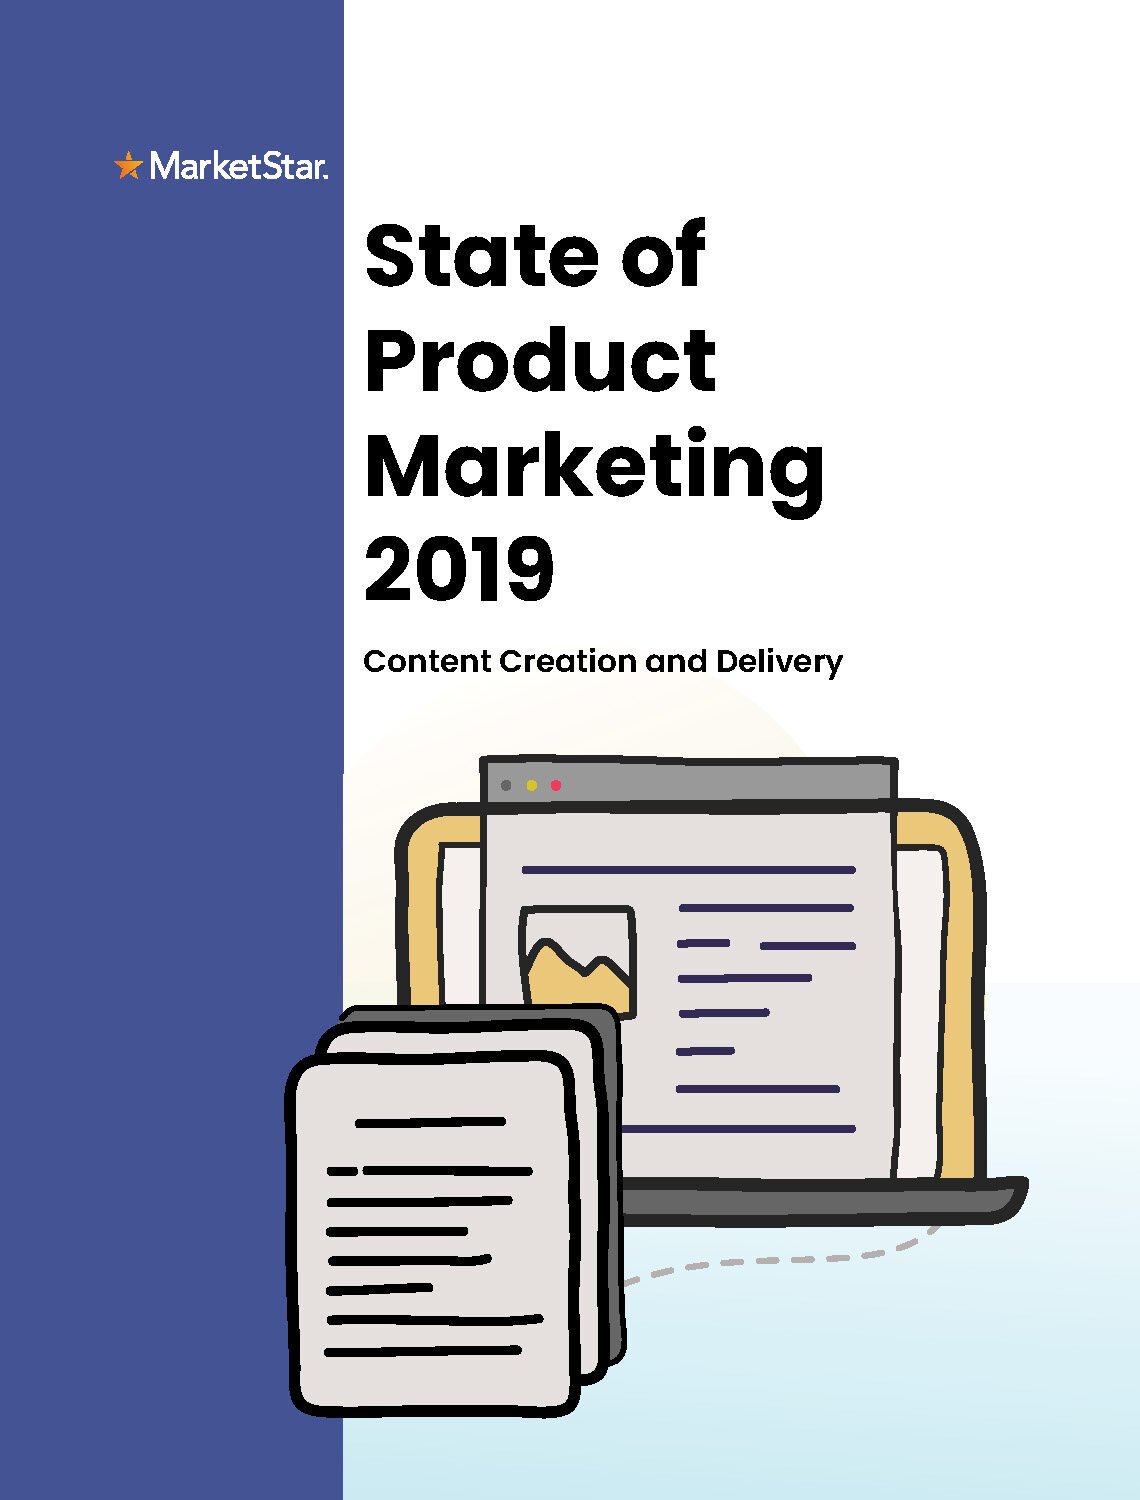 State of Product Marketing 2019: Content Creation and Delivery